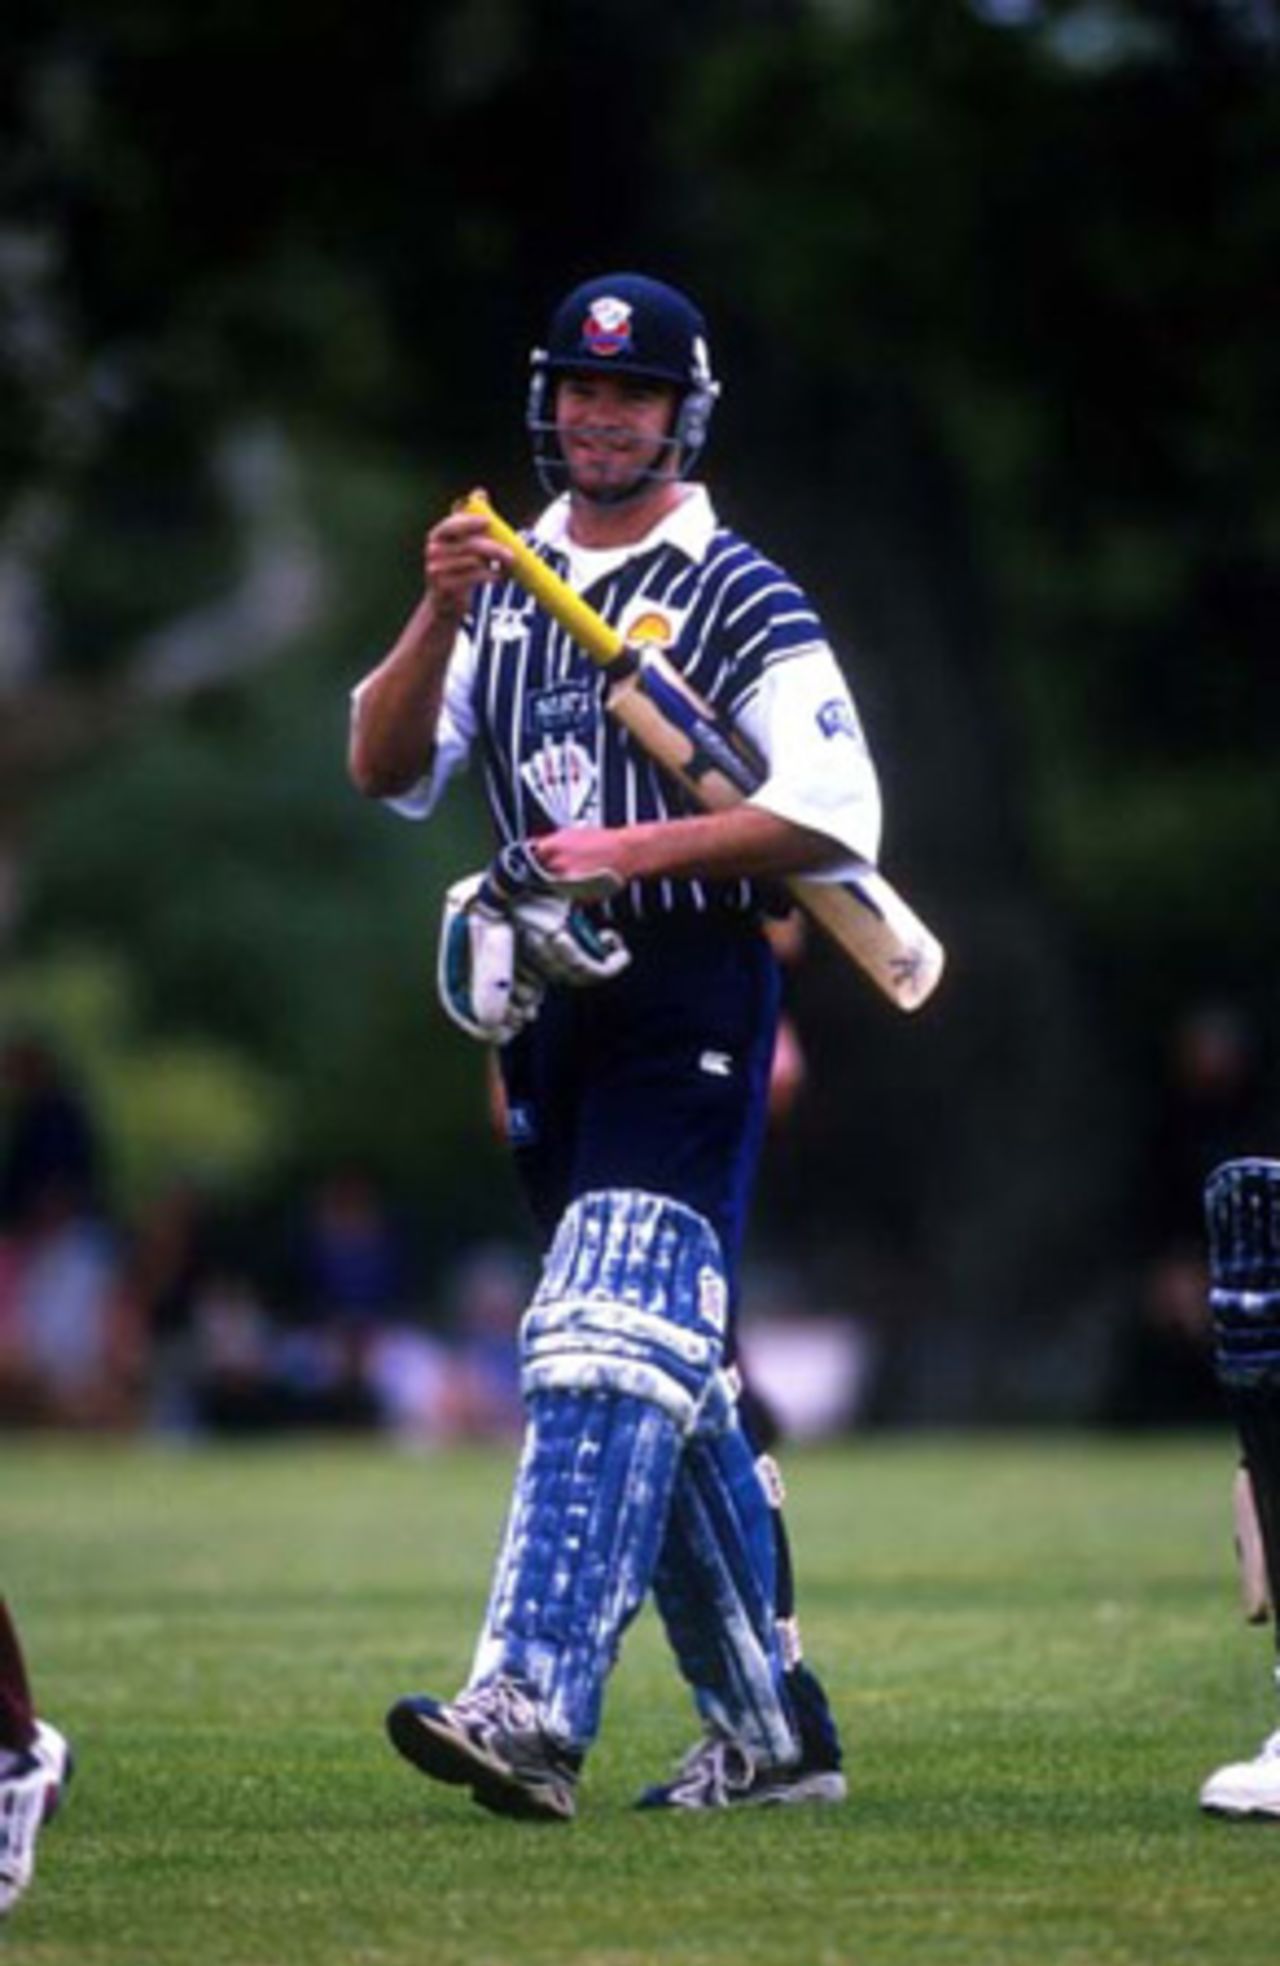 Auckland batsman Dion Nash leaves the field at the end of a Shell Cup innings in 1999/00.